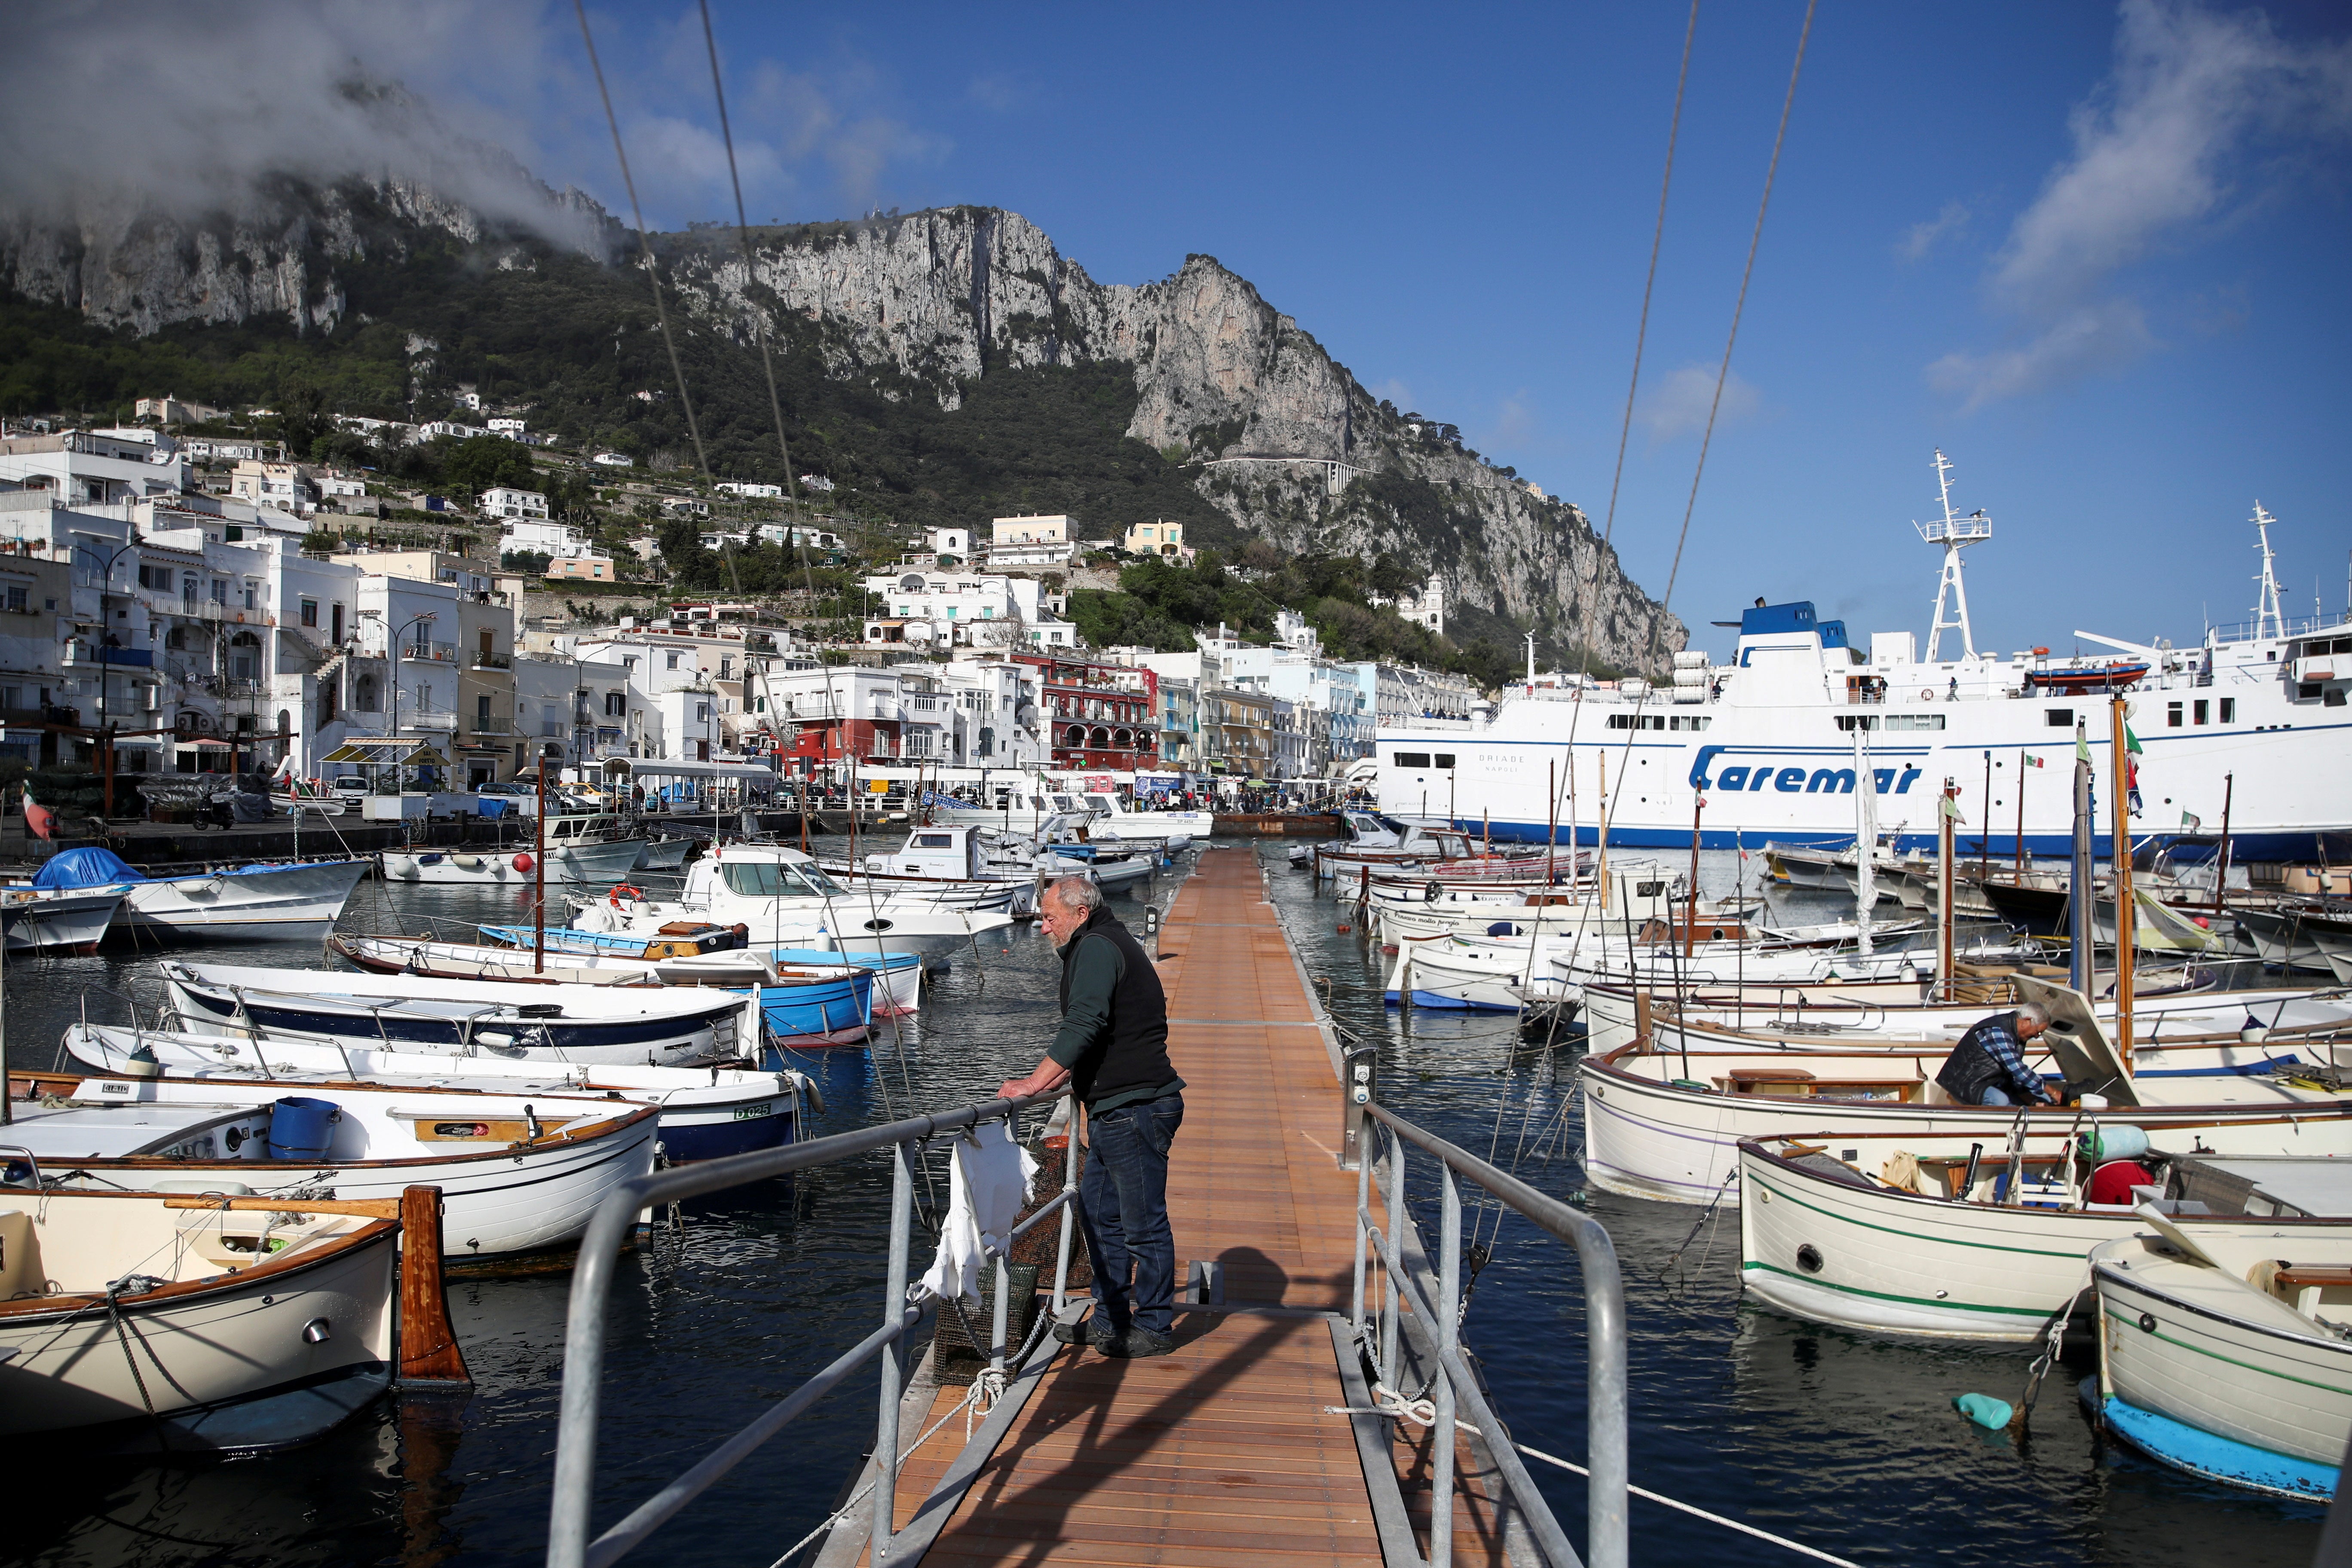 A man looks on in Marina Grande, the main port of the island of Capri, on 28 April, 2021.